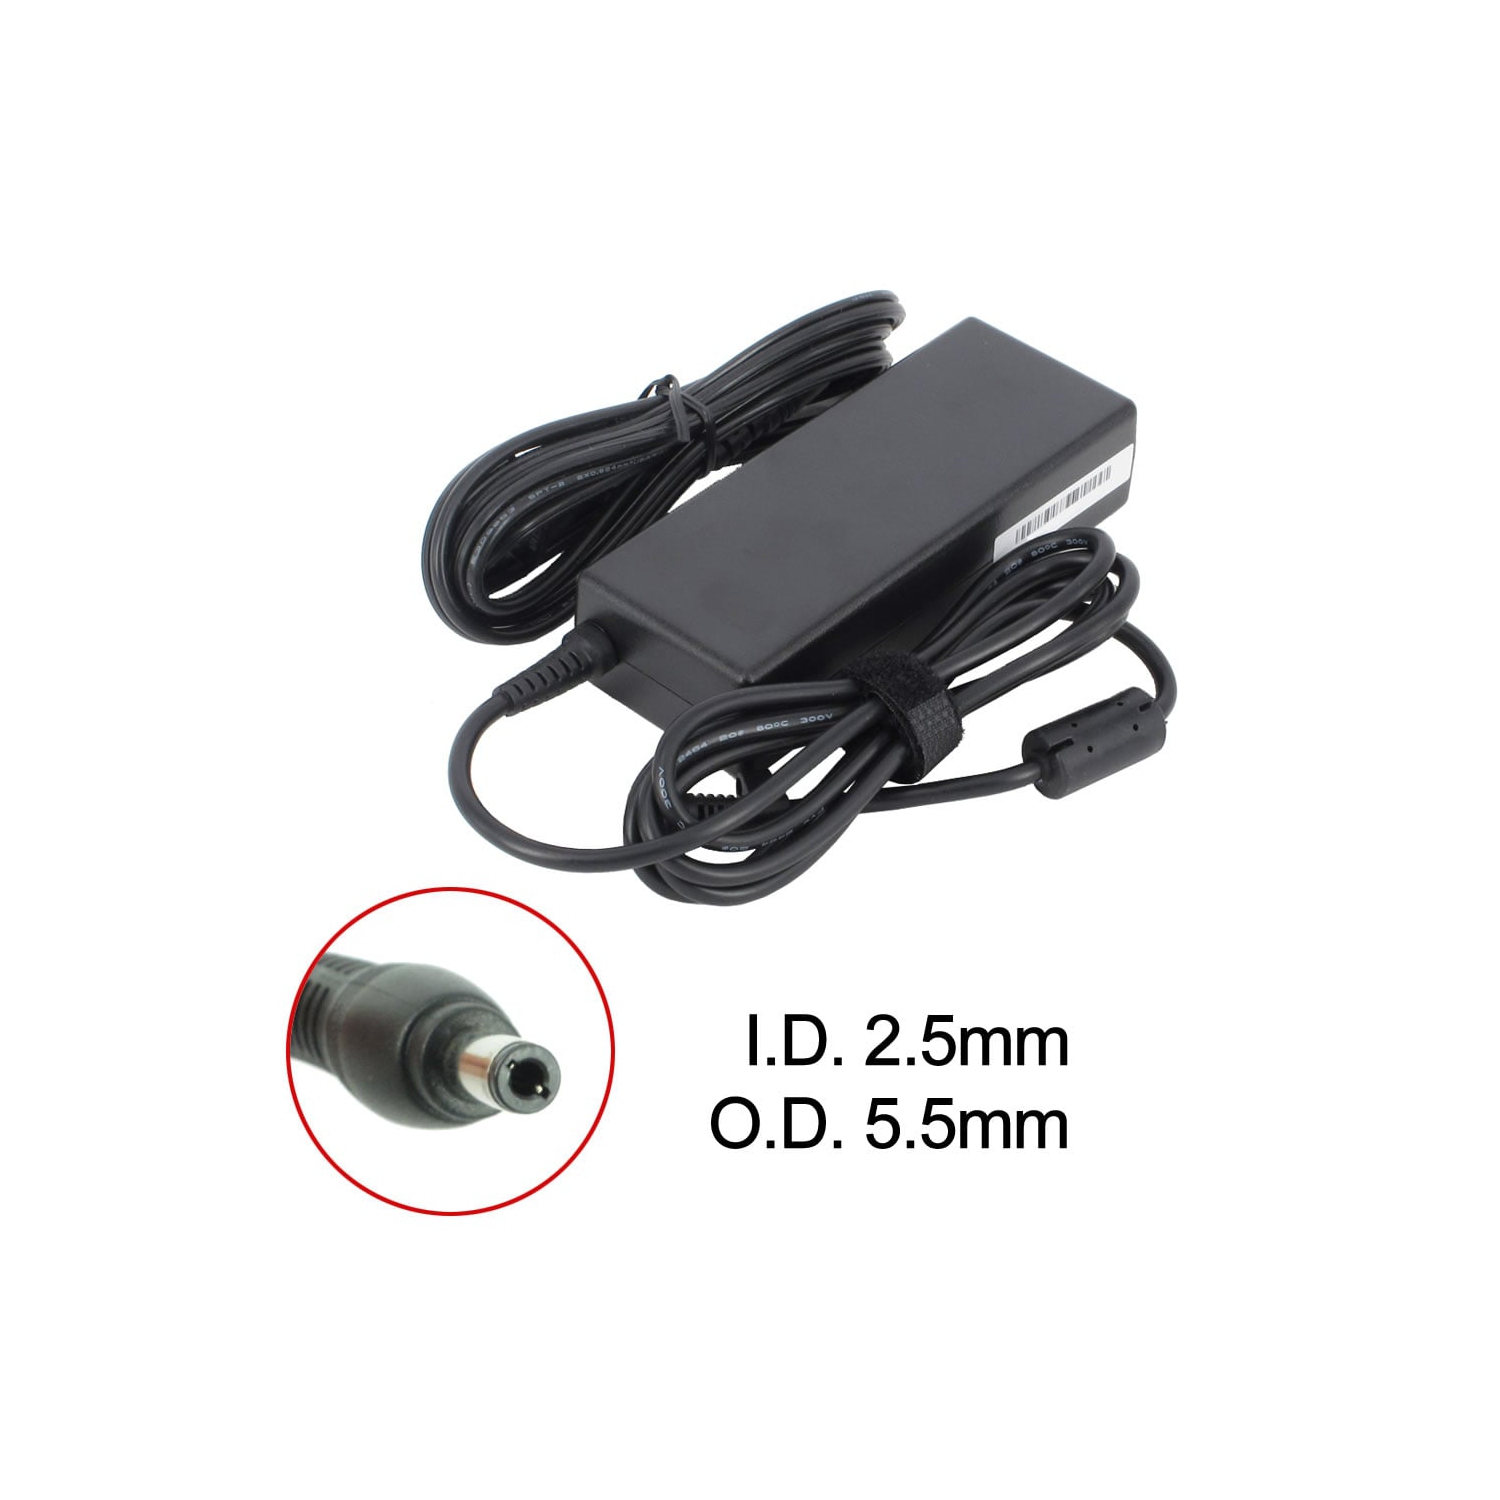 BATTDEPOT New Laptop AC Adapter for NEC LL300/4D 103942 808-875692-010A 9T458 ADP-65 HB BBEF PA-1900-36 SA80-3115